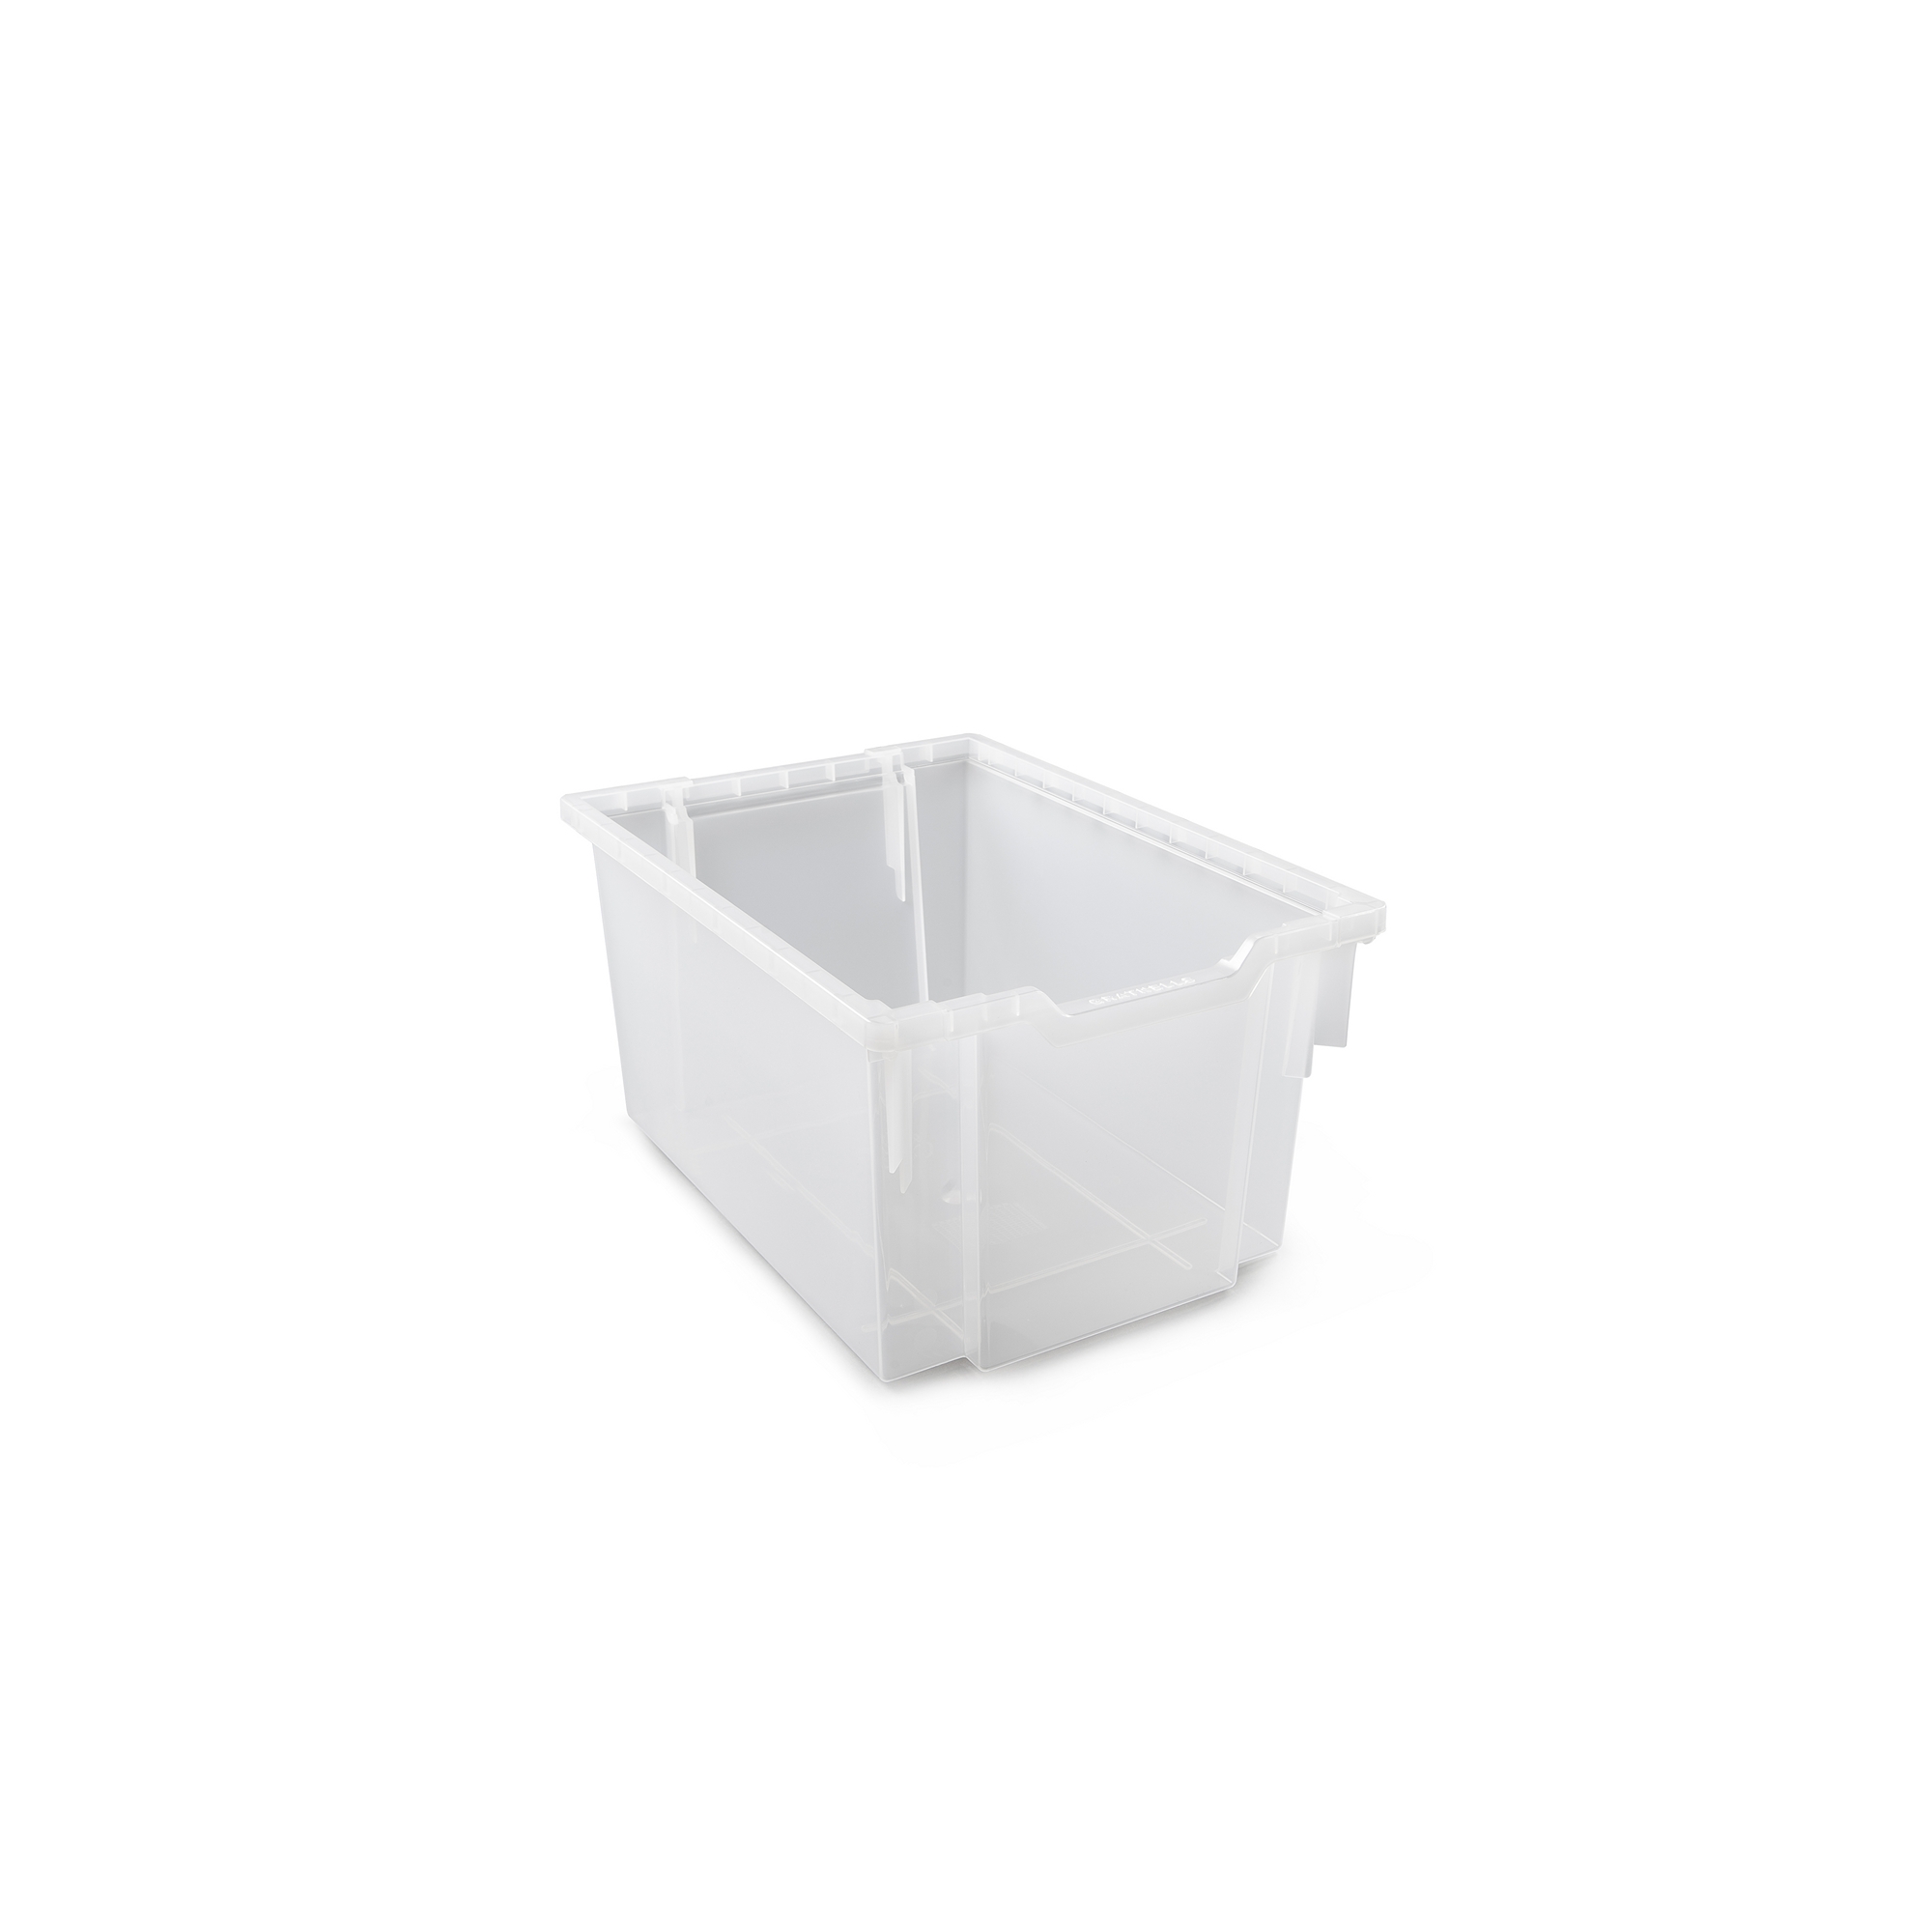 Gratnells Extra Deep Antimicrobial Tray Translucent